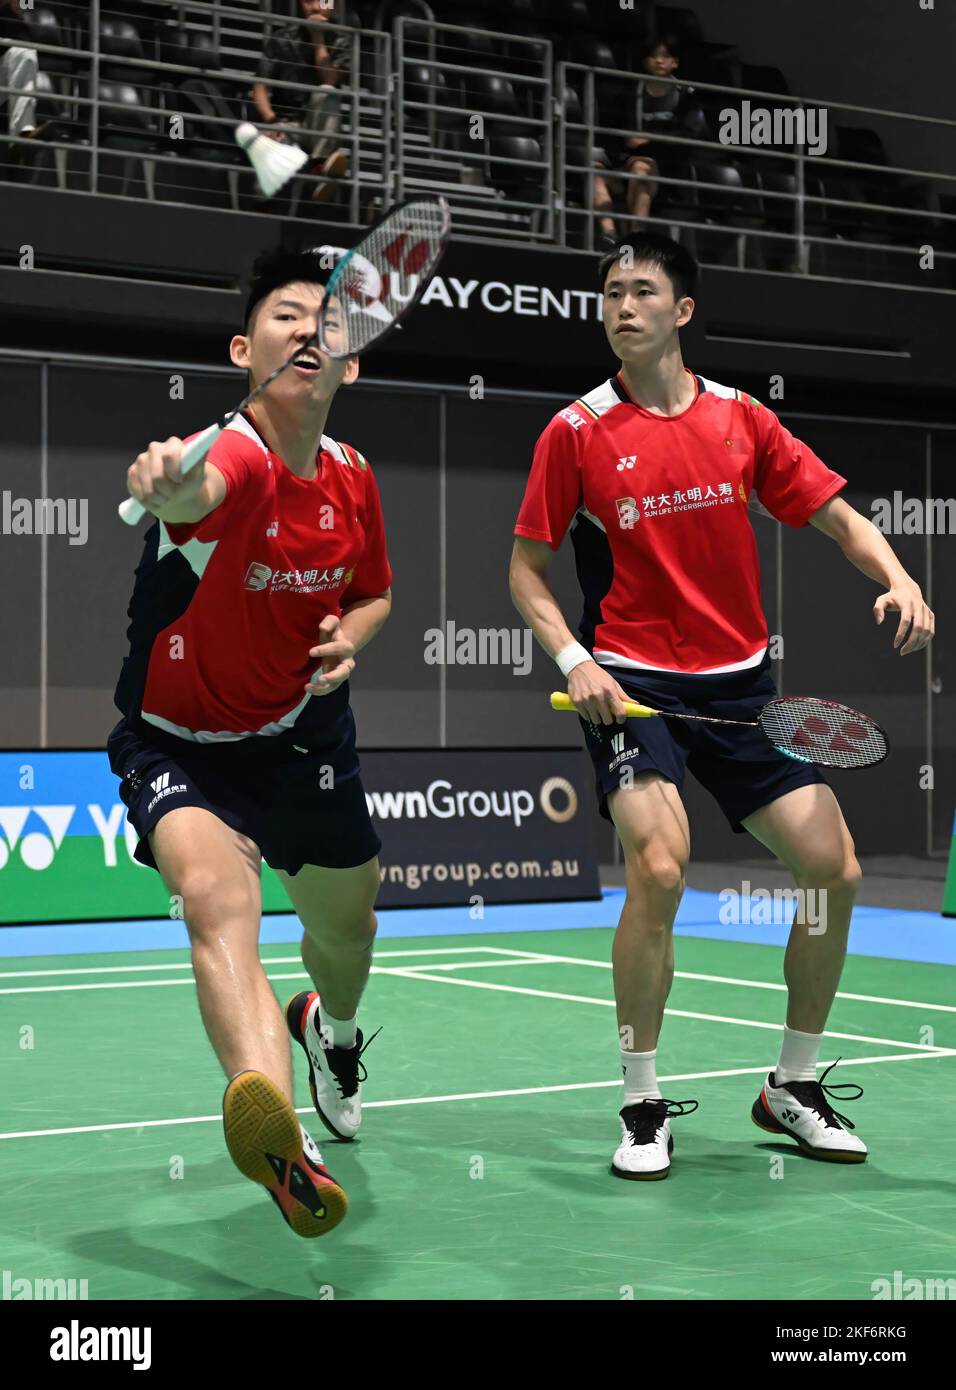 Sydney, Australia. 16th Nov, 2022. Liu Yu Chen (L) and Ou Xuan Yi (R) of China are seen during the 2022 SATHIO GROUP Australian Badminton Open Round of 32 Men's Double match against Ren Xiang Yu and Tan Qiang of China. Liu and Ou won the match 21-18, 21-12. (Photo by Luis Veniegra/SOPA Images/Sipa USA) Credit: Sipa USA/Alamy Live News Stock Photo